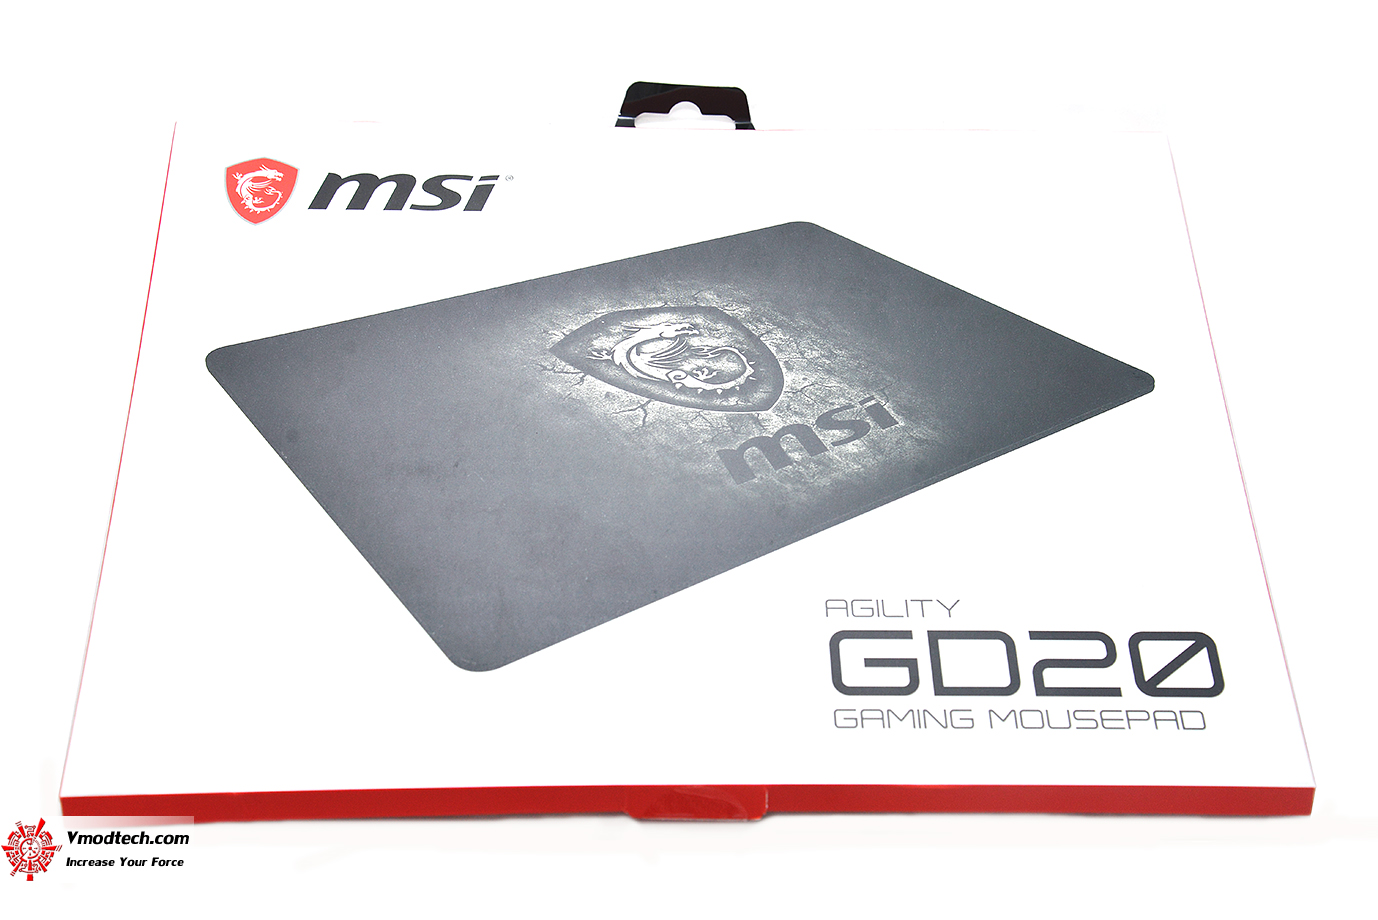 dsc 5027 MSI AGILITY GD20 GAMING MOUSEPAD REVIEW